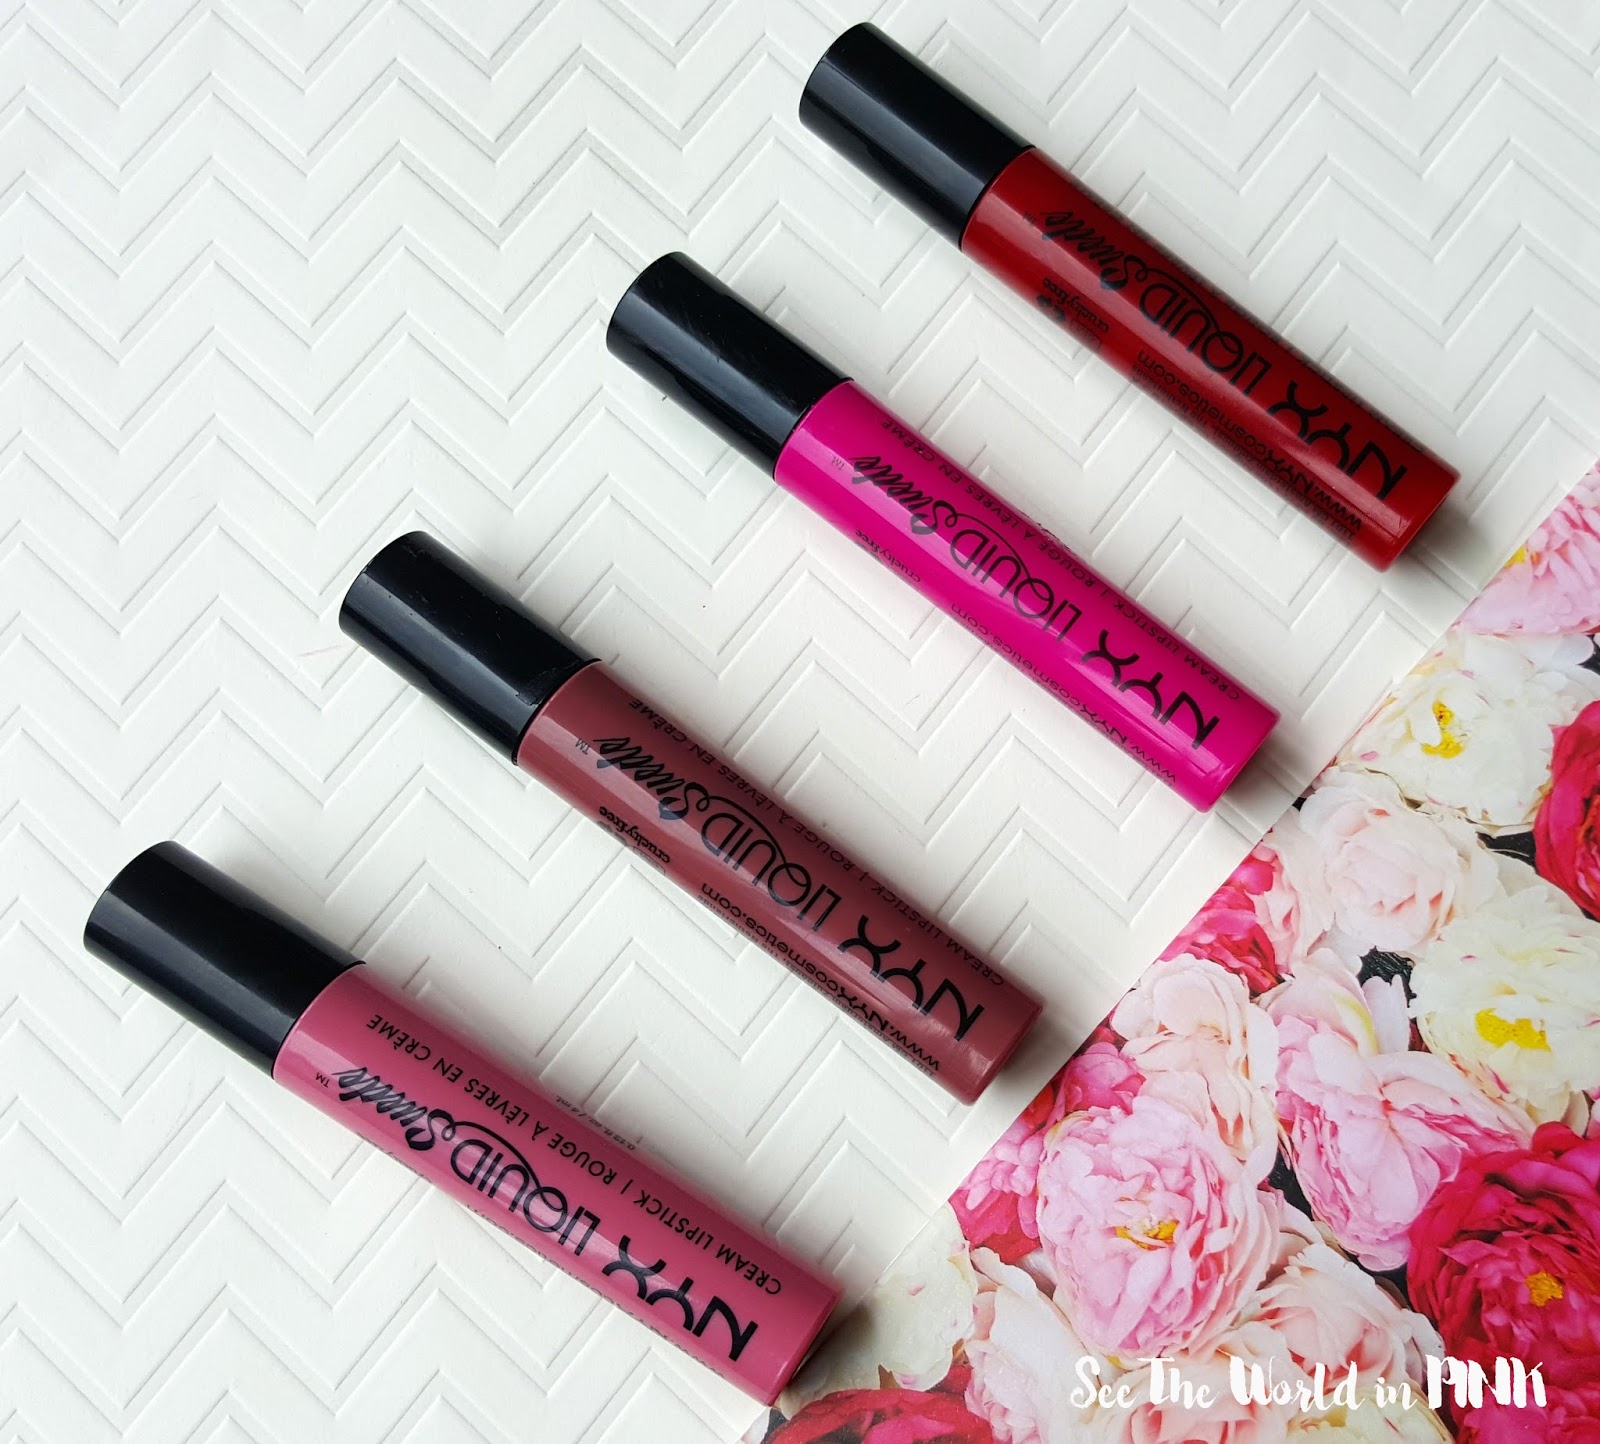 NYX Liquid Suede Cream Lipsticks - Review and Swatches